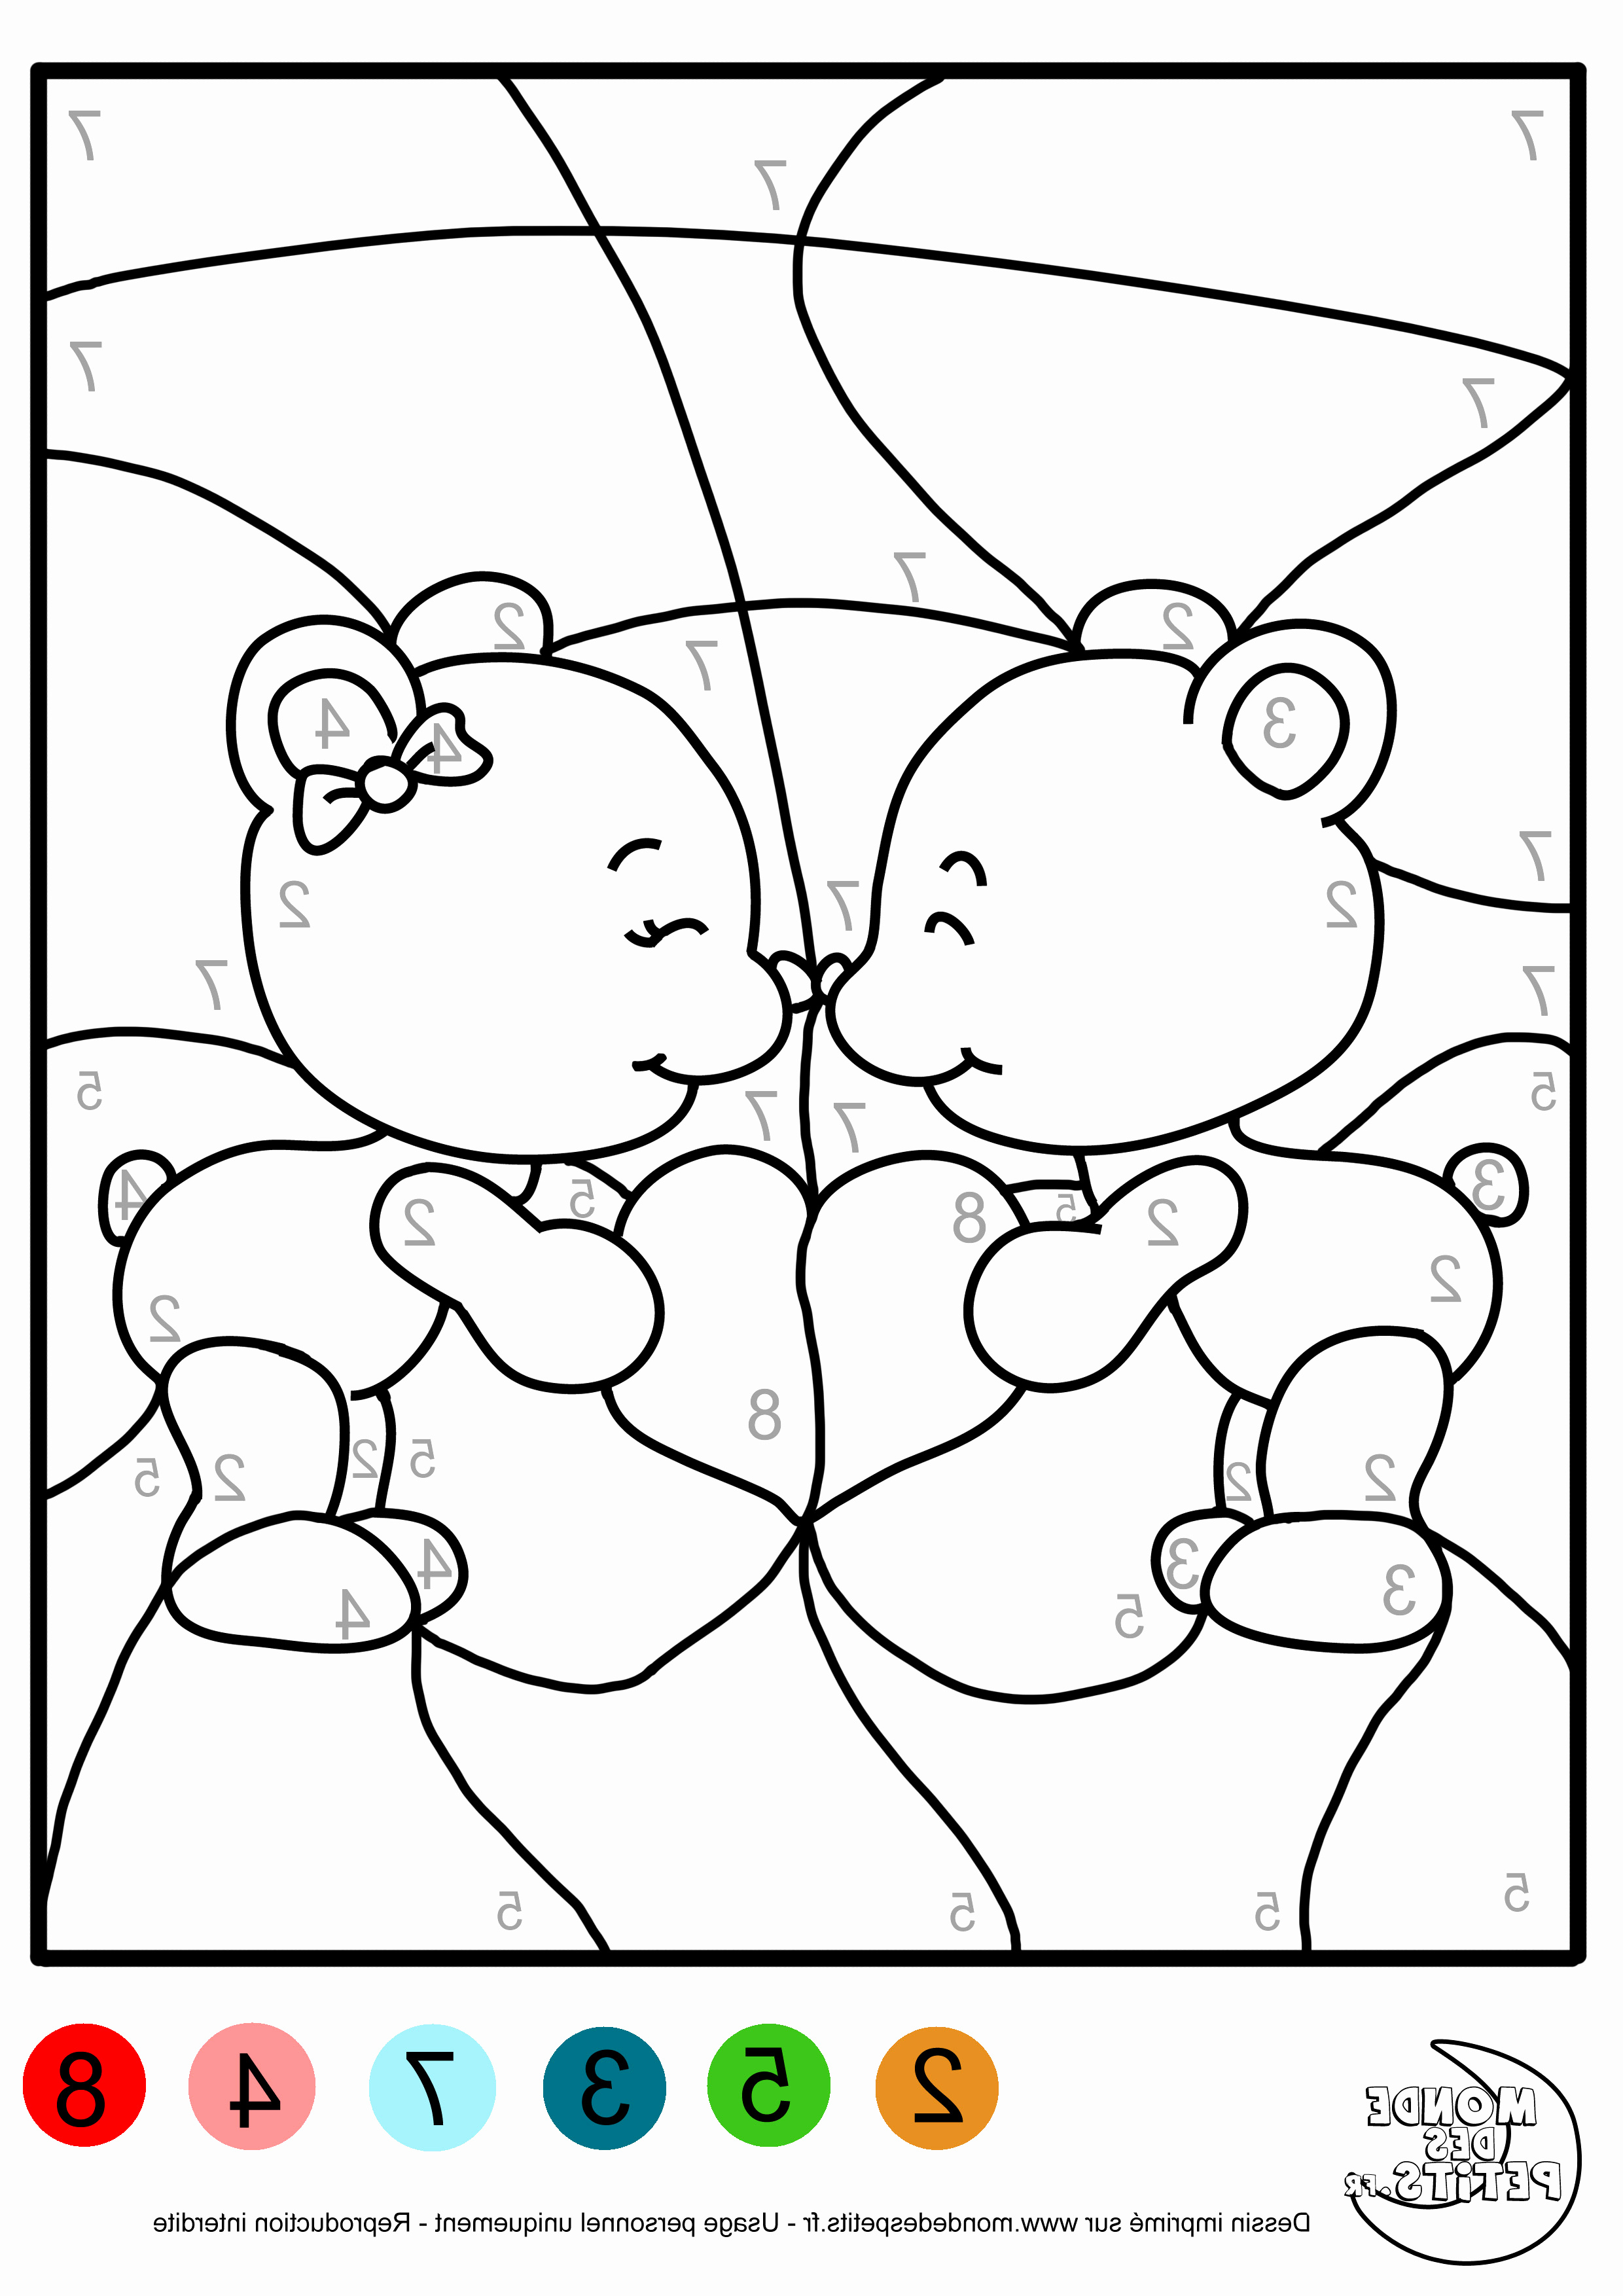 Coloriage Minion Fille Luxe Photographie Coloriage Fille 4 Ans Nouveau Coloriage Pour Fille Frais